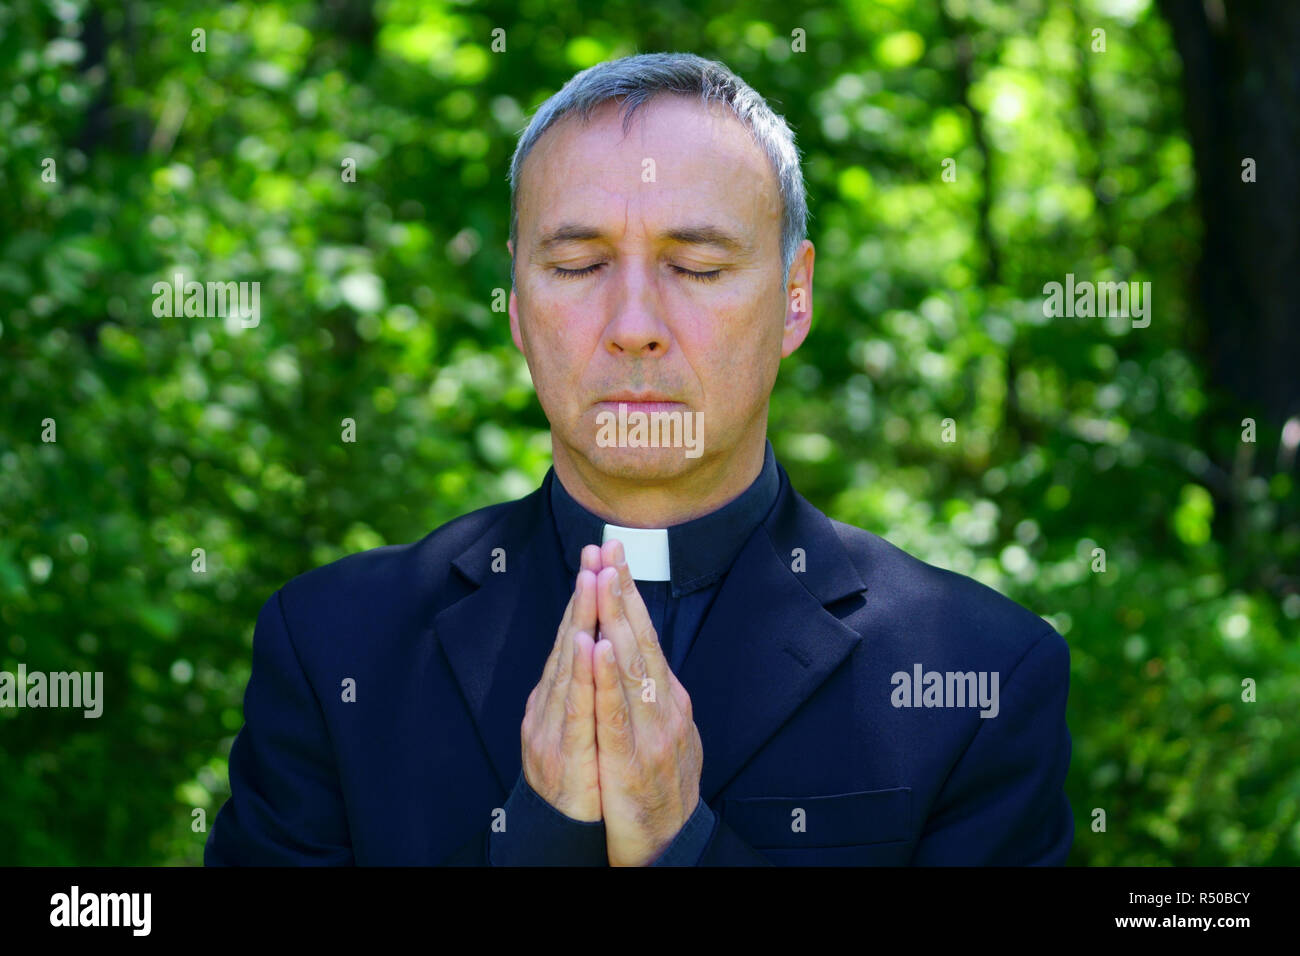 A good looking catholic priest is praying in the forest.  He joins hands. Eyes closed. Stock Photo